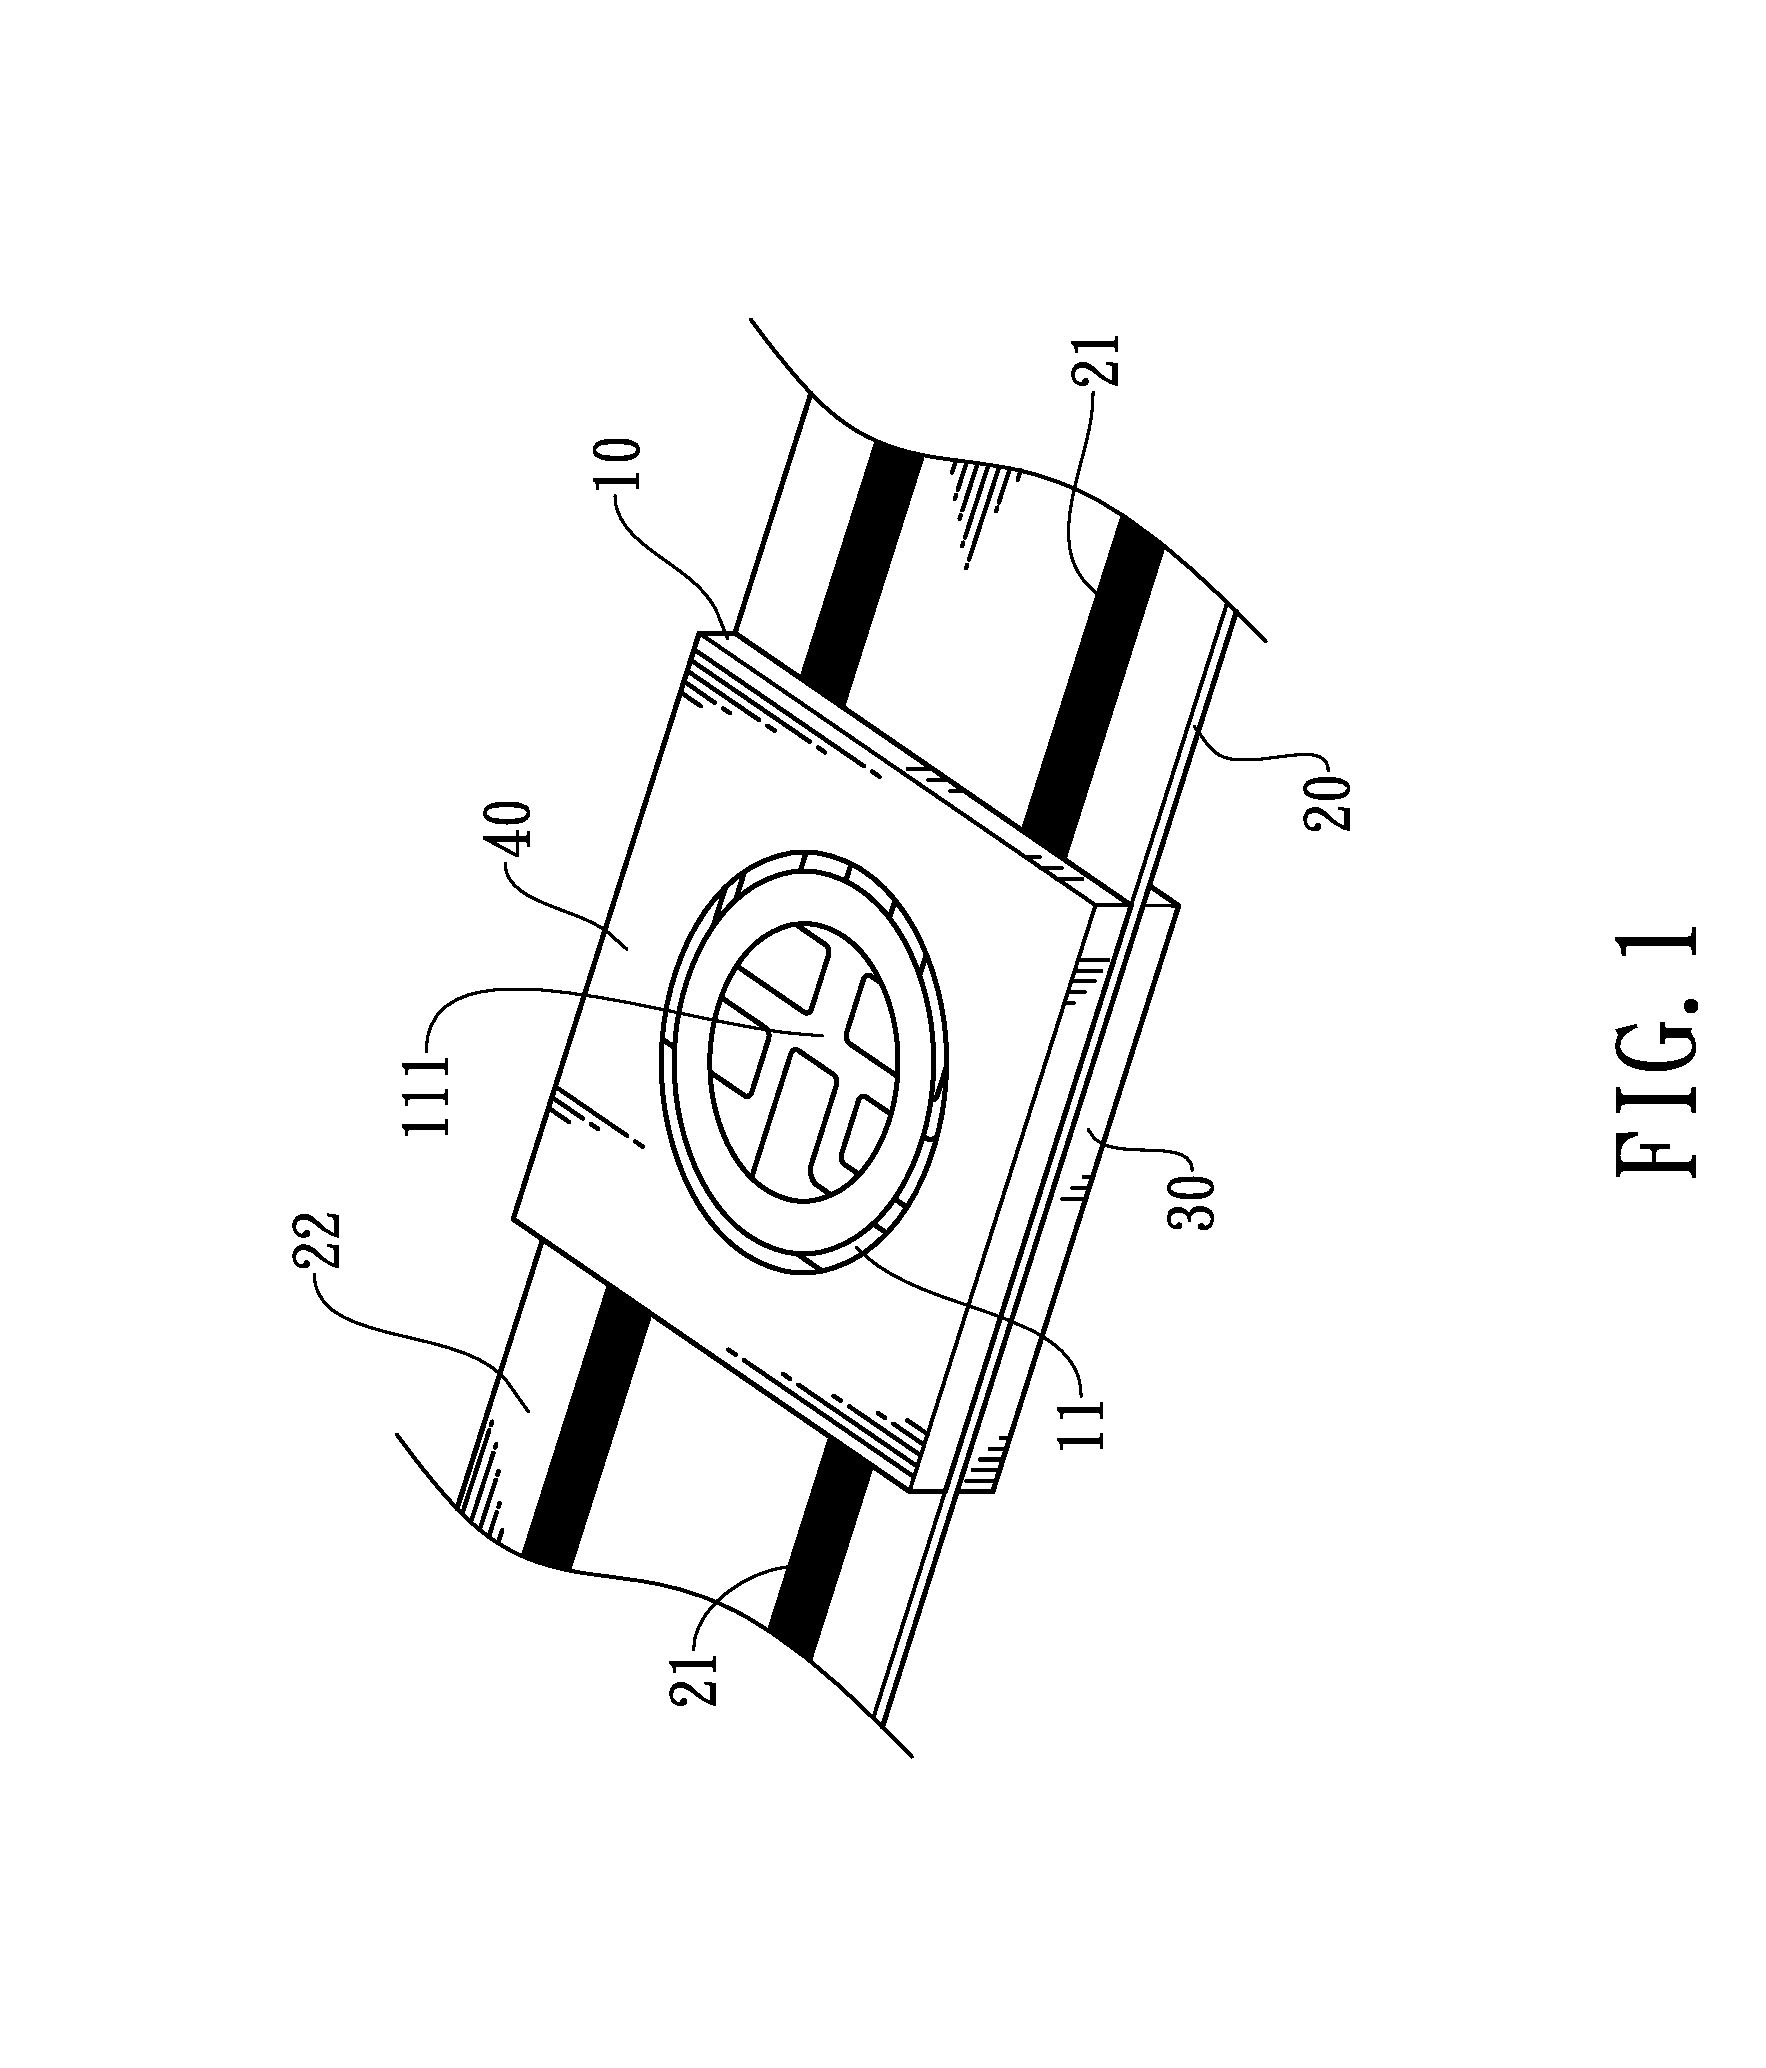 Substrate structrue for light-emitting diode